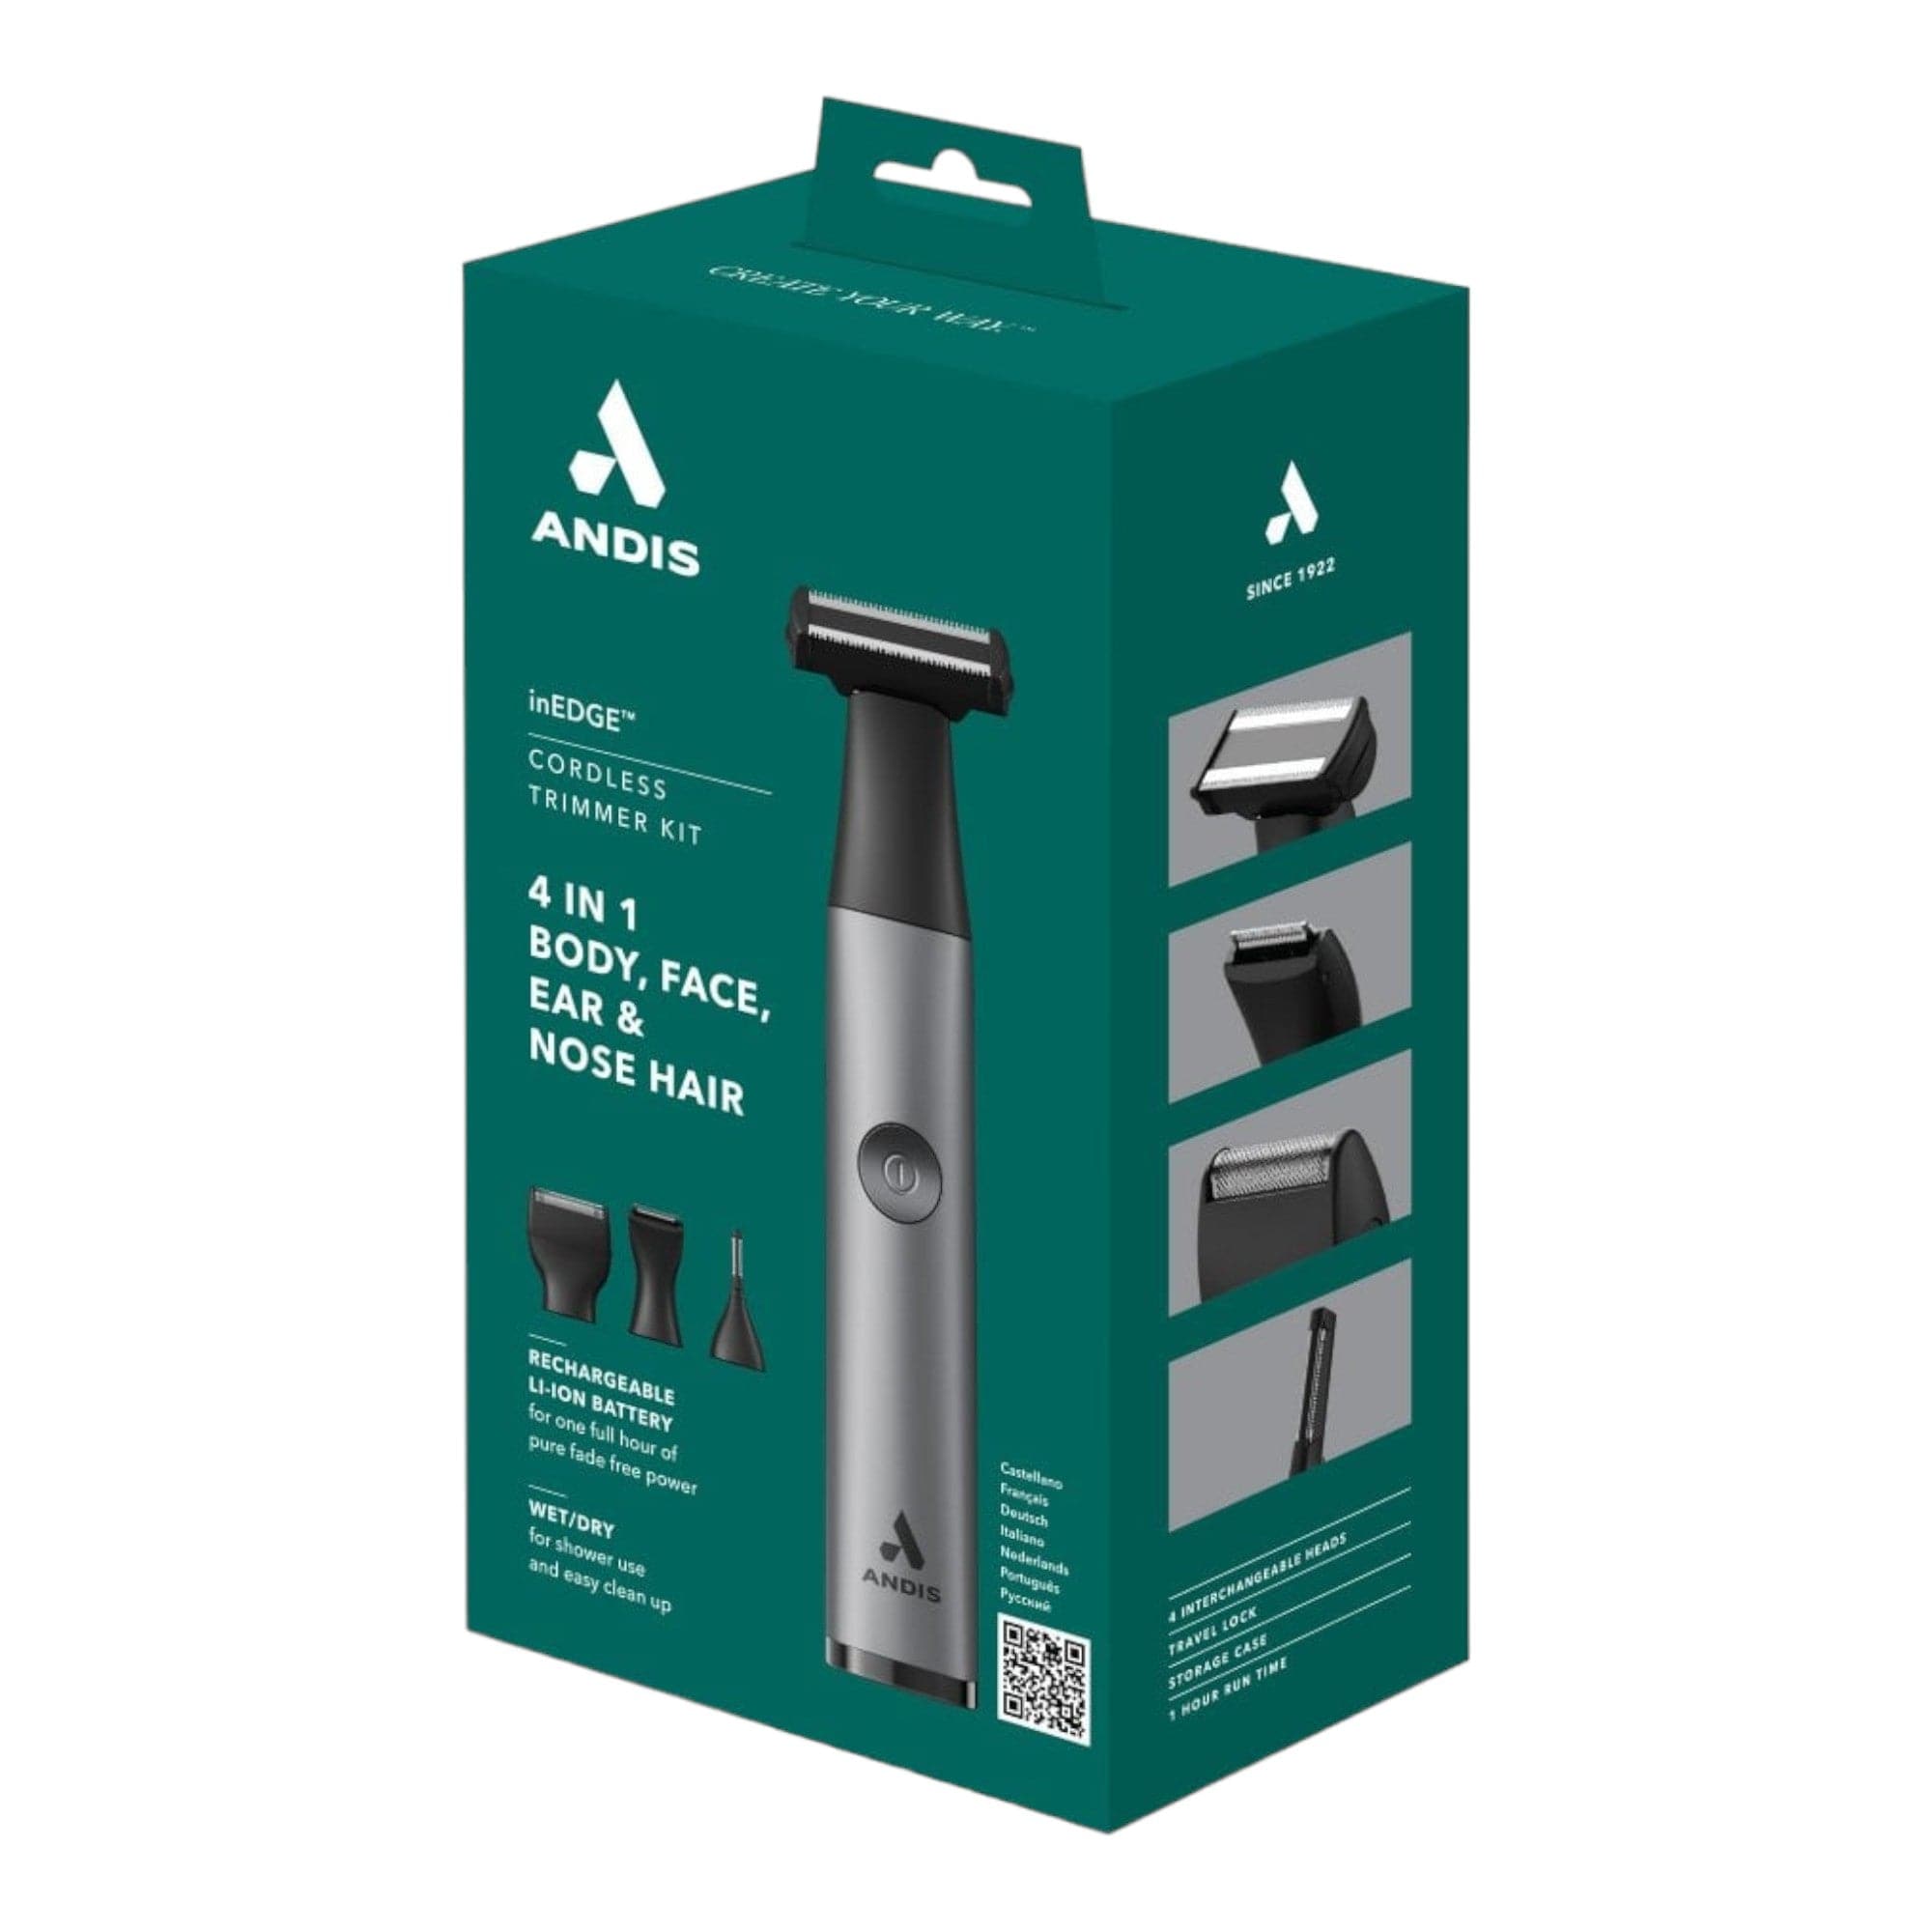 Andis - inEDGE Lithium-ion Cordless All-in-One Trimmer 560584